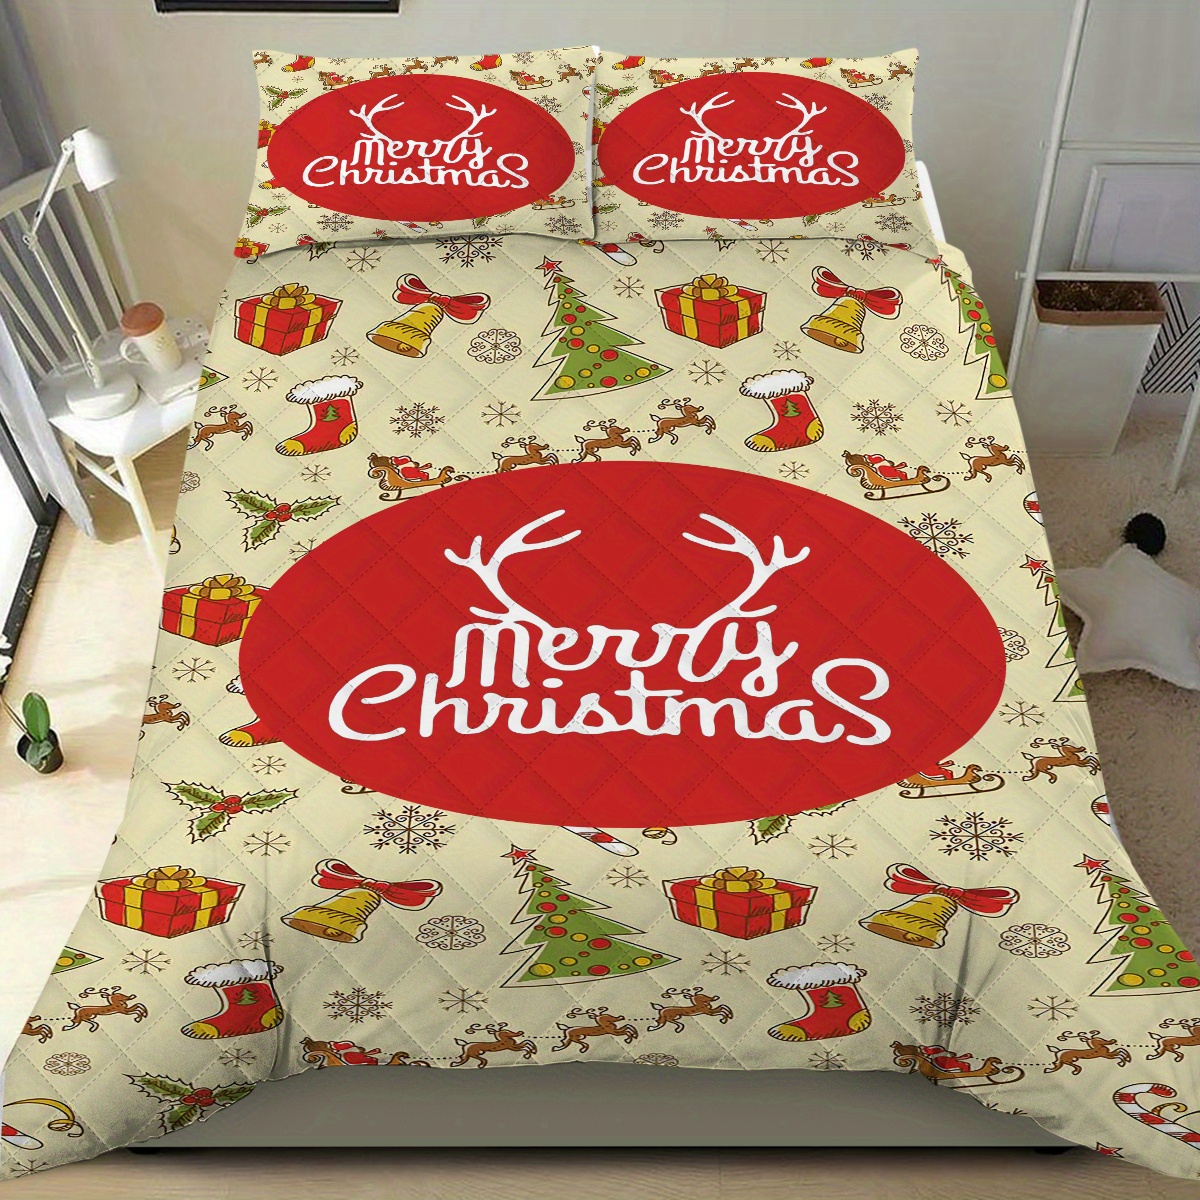 3pcs merry christmas quilt set cartoon reindeer xmas tree print quilted bedding set soft comfortable quilt for bedroom guest room 1 quilt 2 pillowcases without core